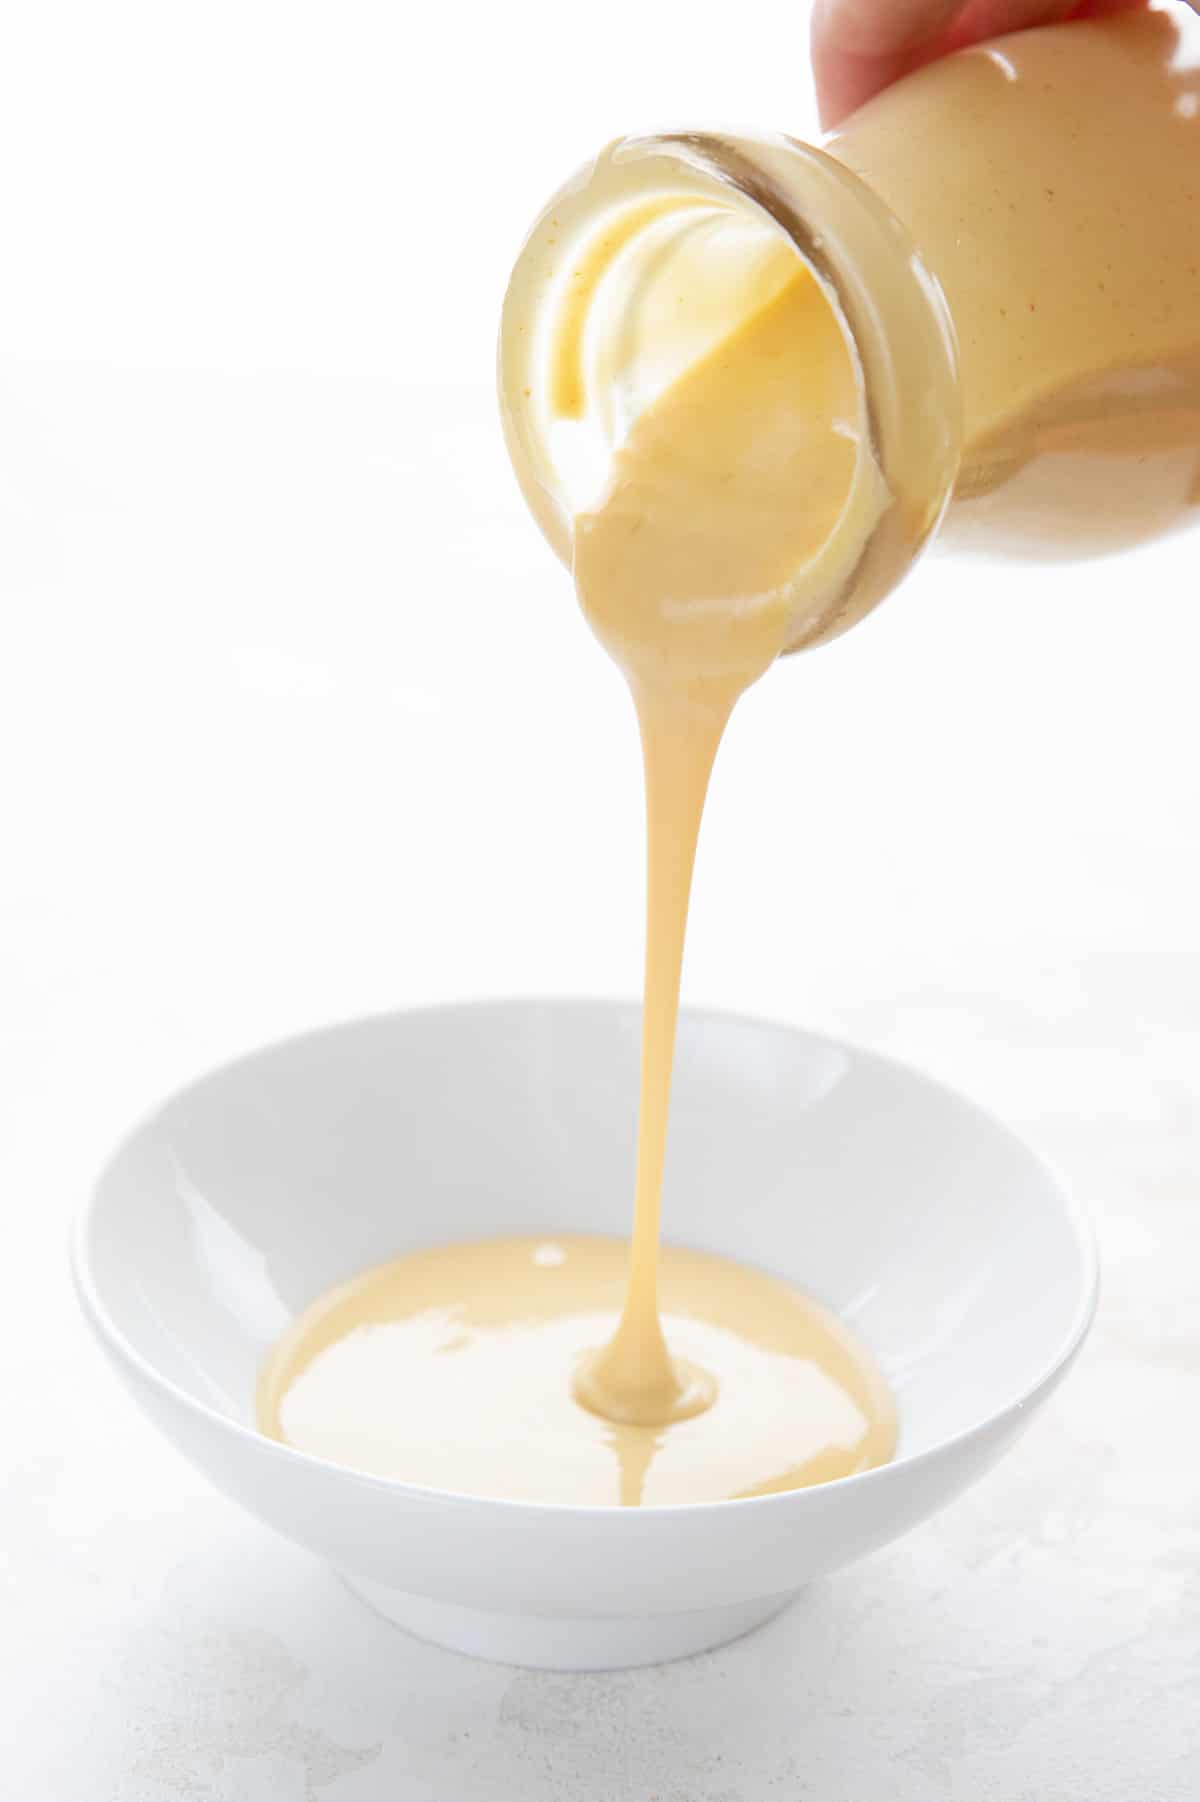 Sugar Free Honey Mustard sauce pouring out of a glass bottle into a white dish.